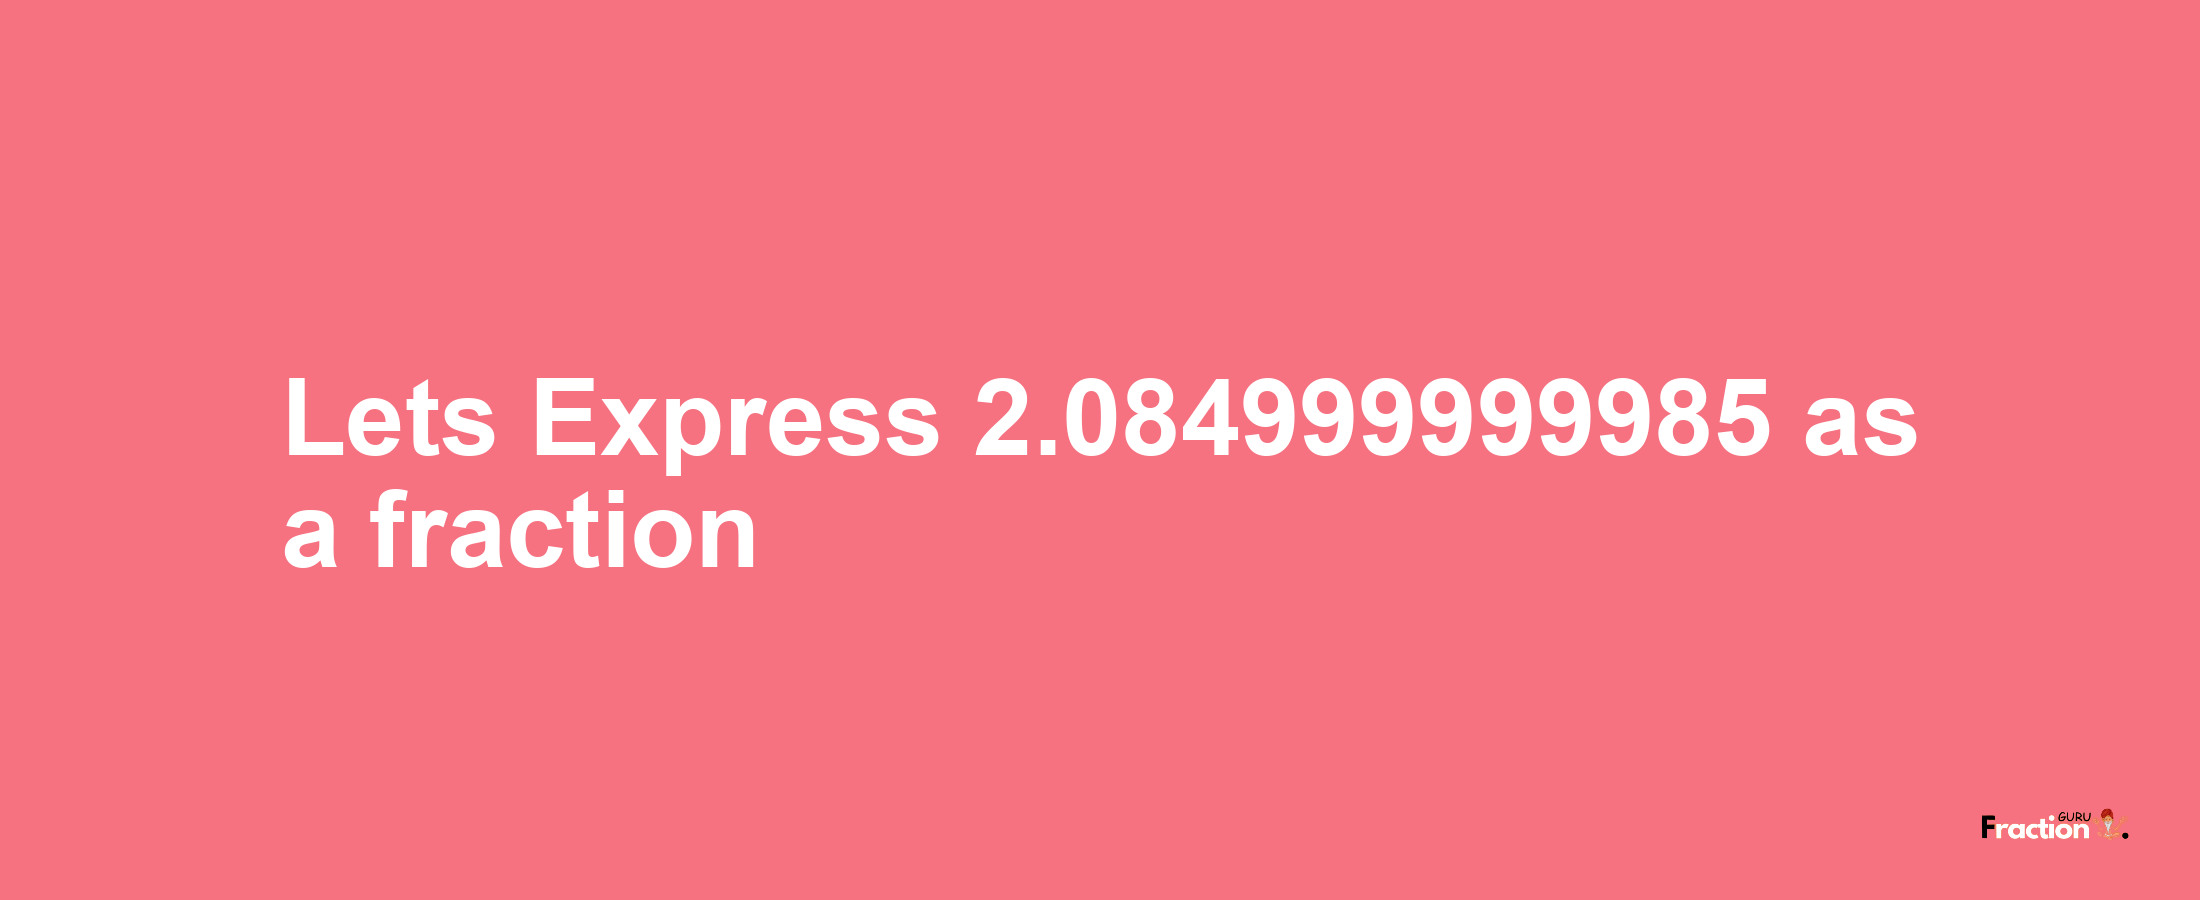 Lets Express 2.084999999985 as afraction